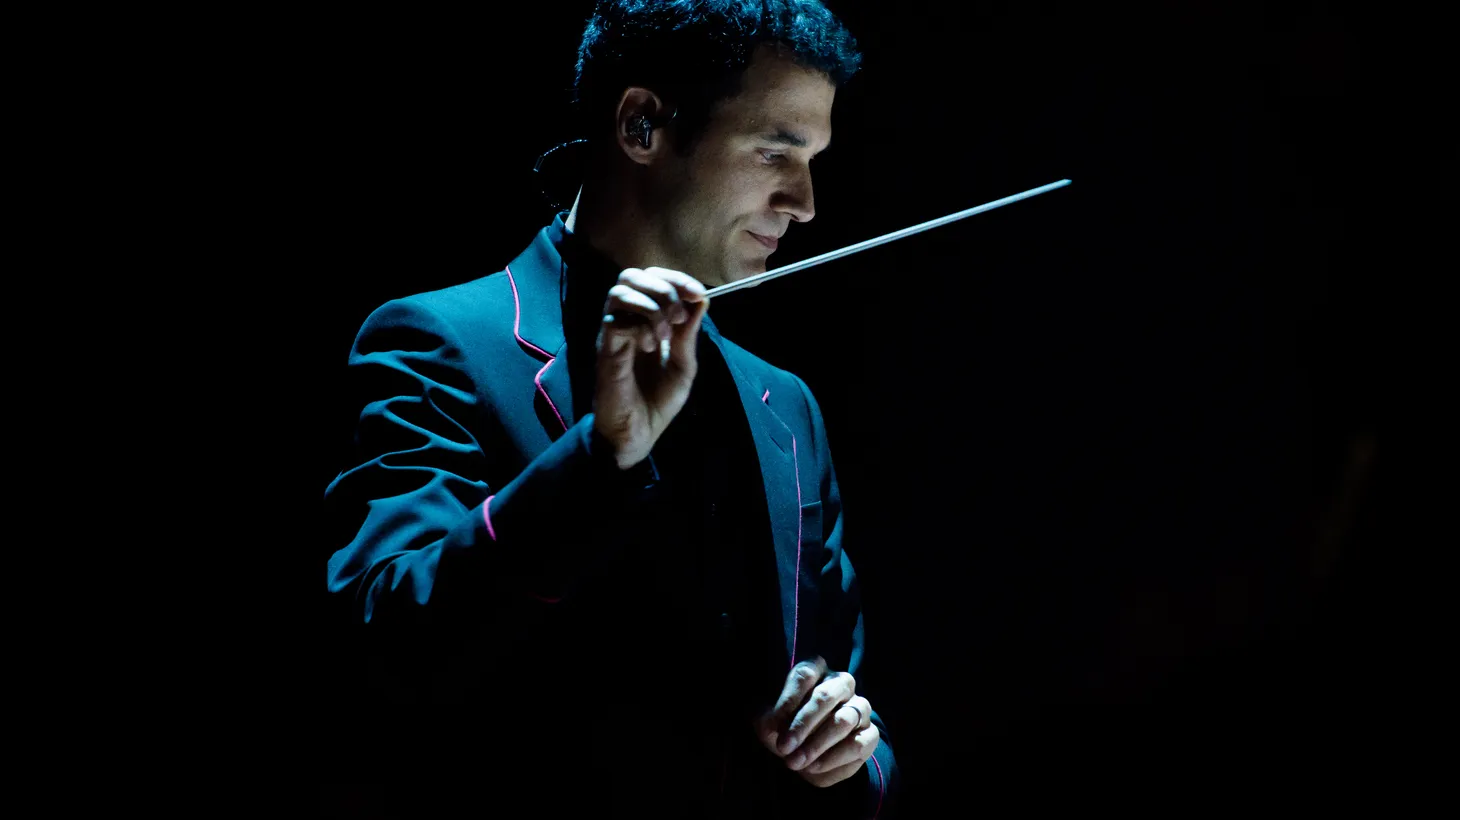 Game of Thrones composer Ramin Djawadi brings a small ensemble to our studio for a live performance.